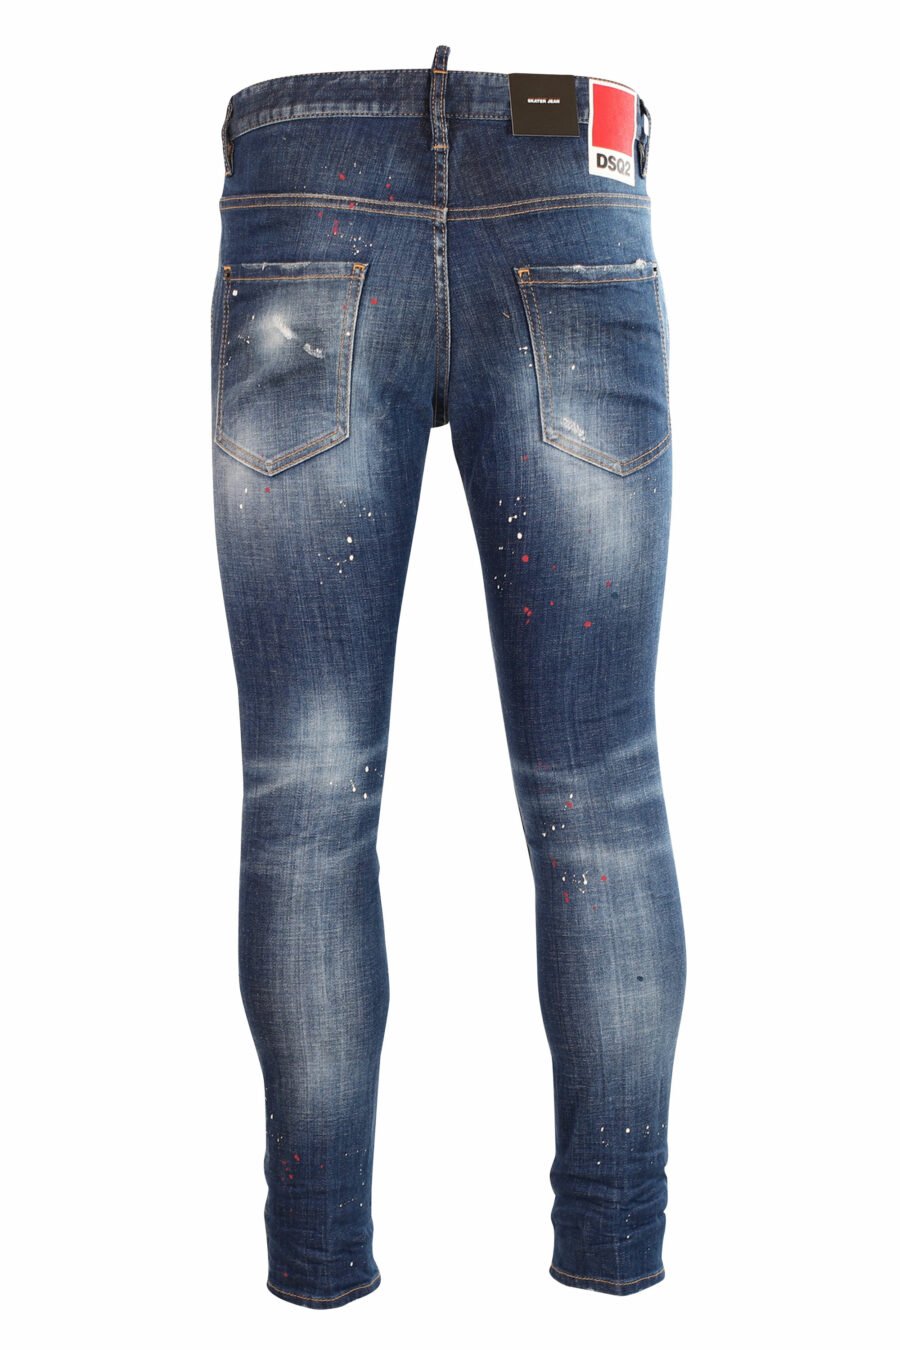 Semi-worn blue "skater" jeans with paint and rips - 8052134940020 3